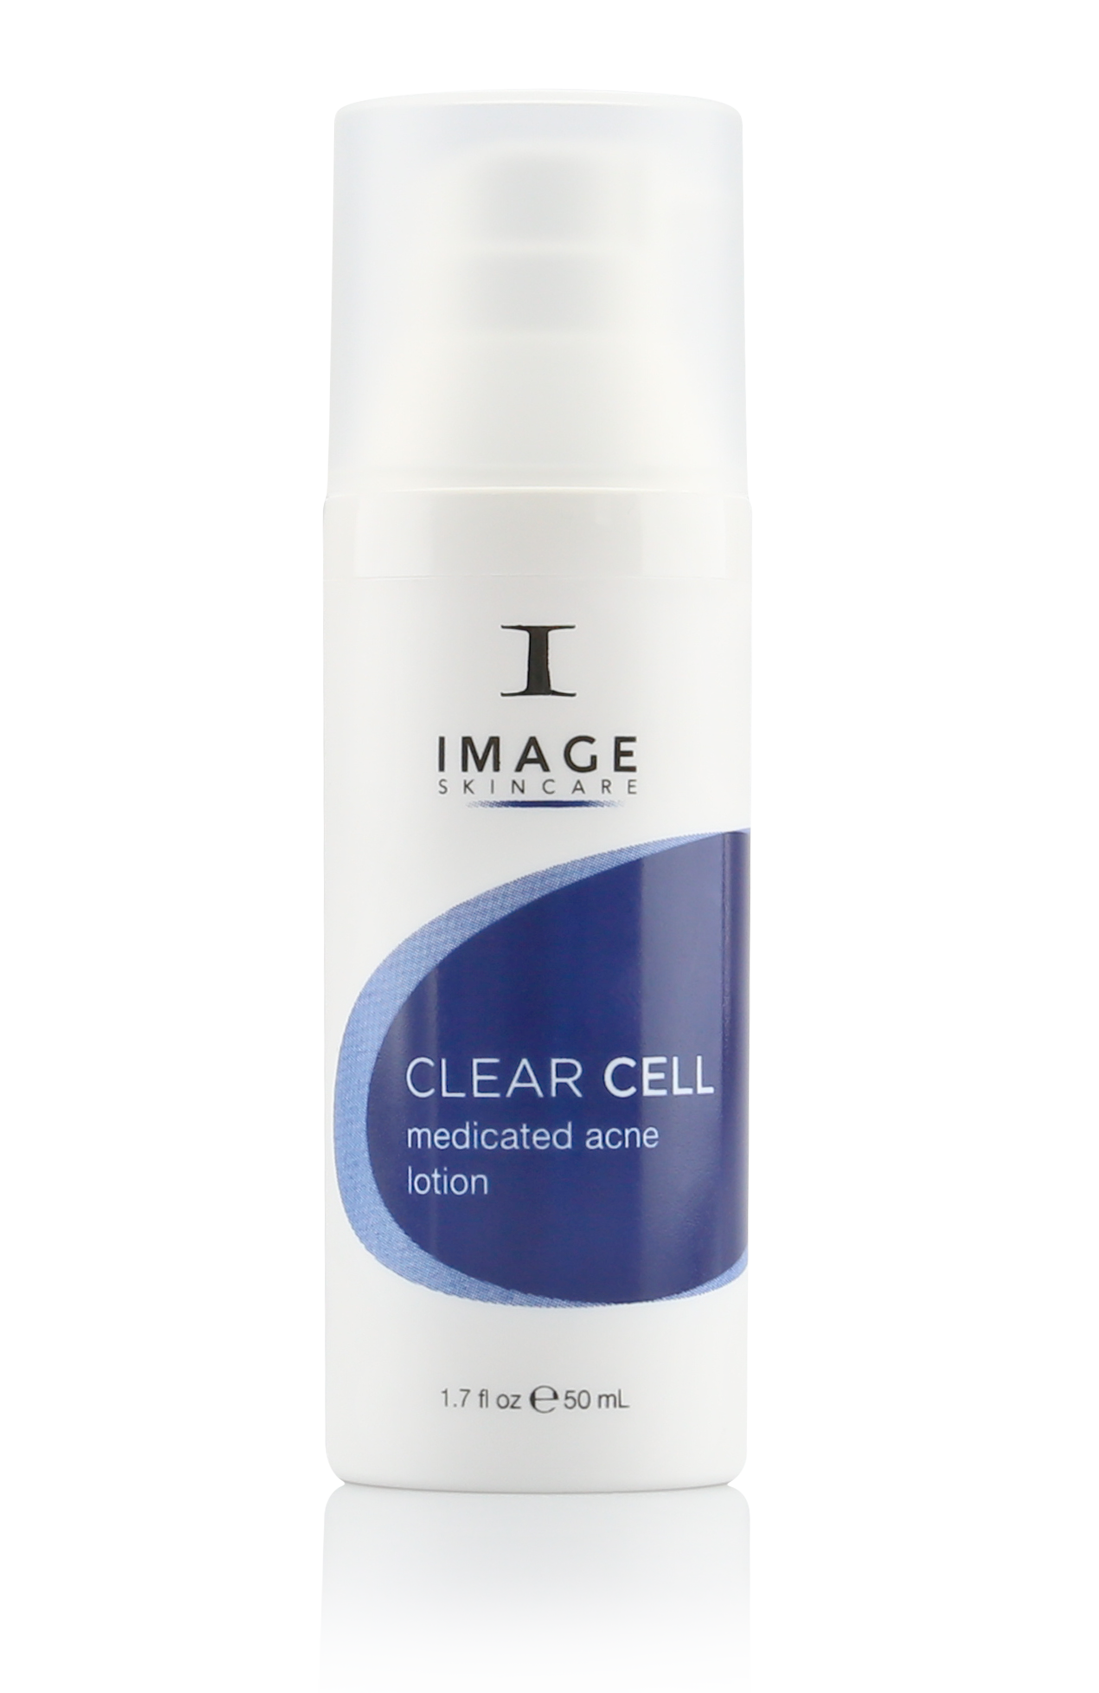 Products Image Skincare Clear Cell Medicated Acne Lotion